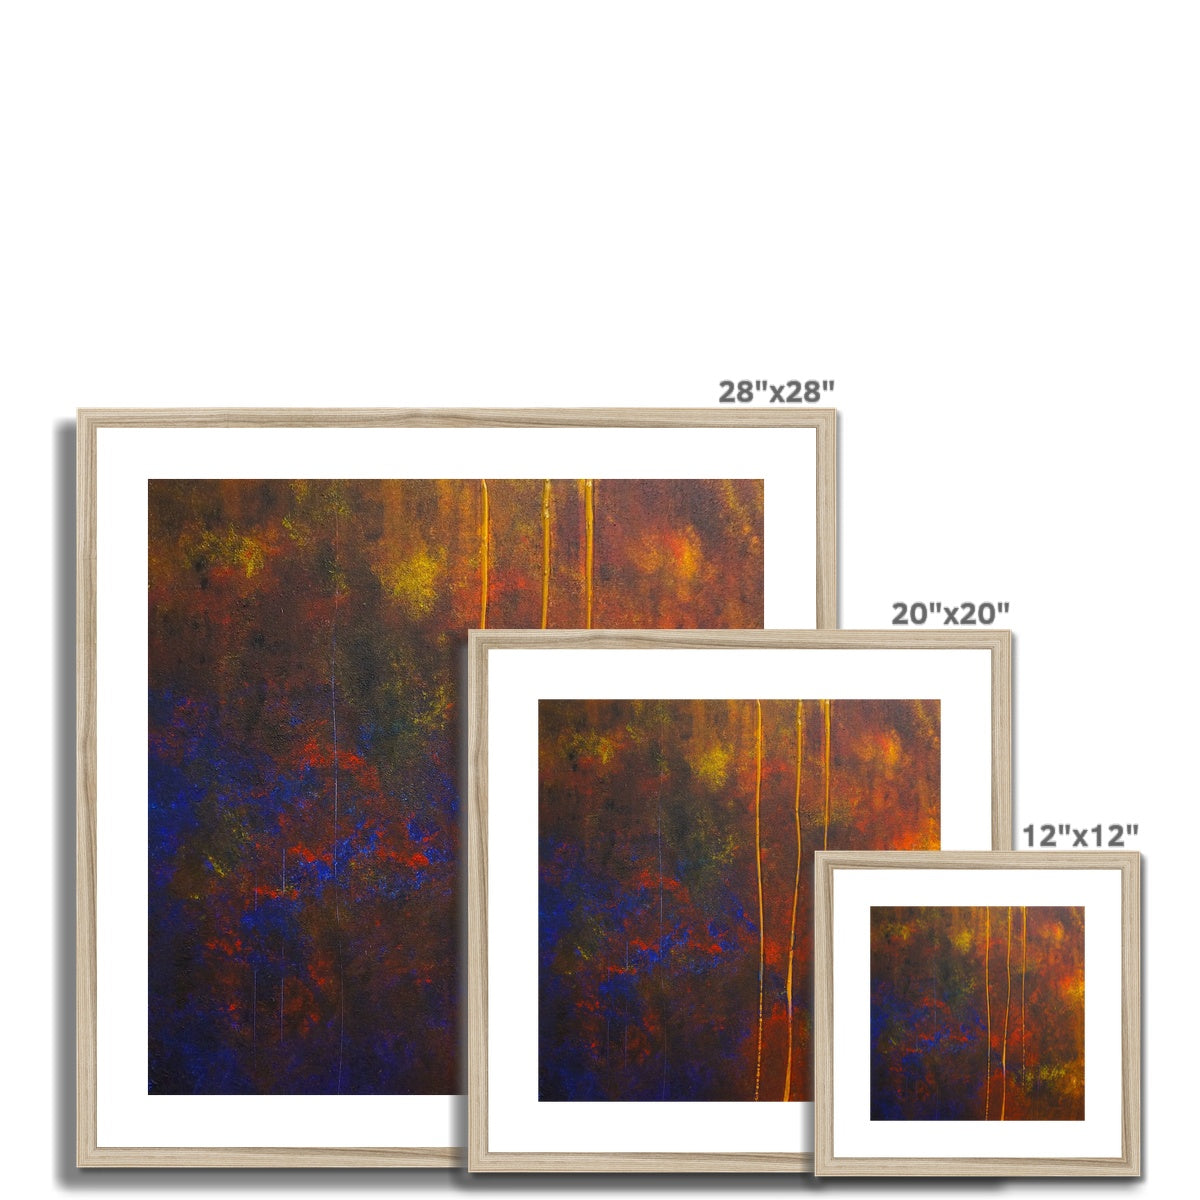 The Autumn Wood Abstract Painting | Framed & Mounted Prints From Scotland-Framed & Mounted Prints-Abstract & Impressionistic Art Gallery-Paintings, Prints, Homeware, Art Gifts From Scotland By Scottish Artist Kevin Hunter